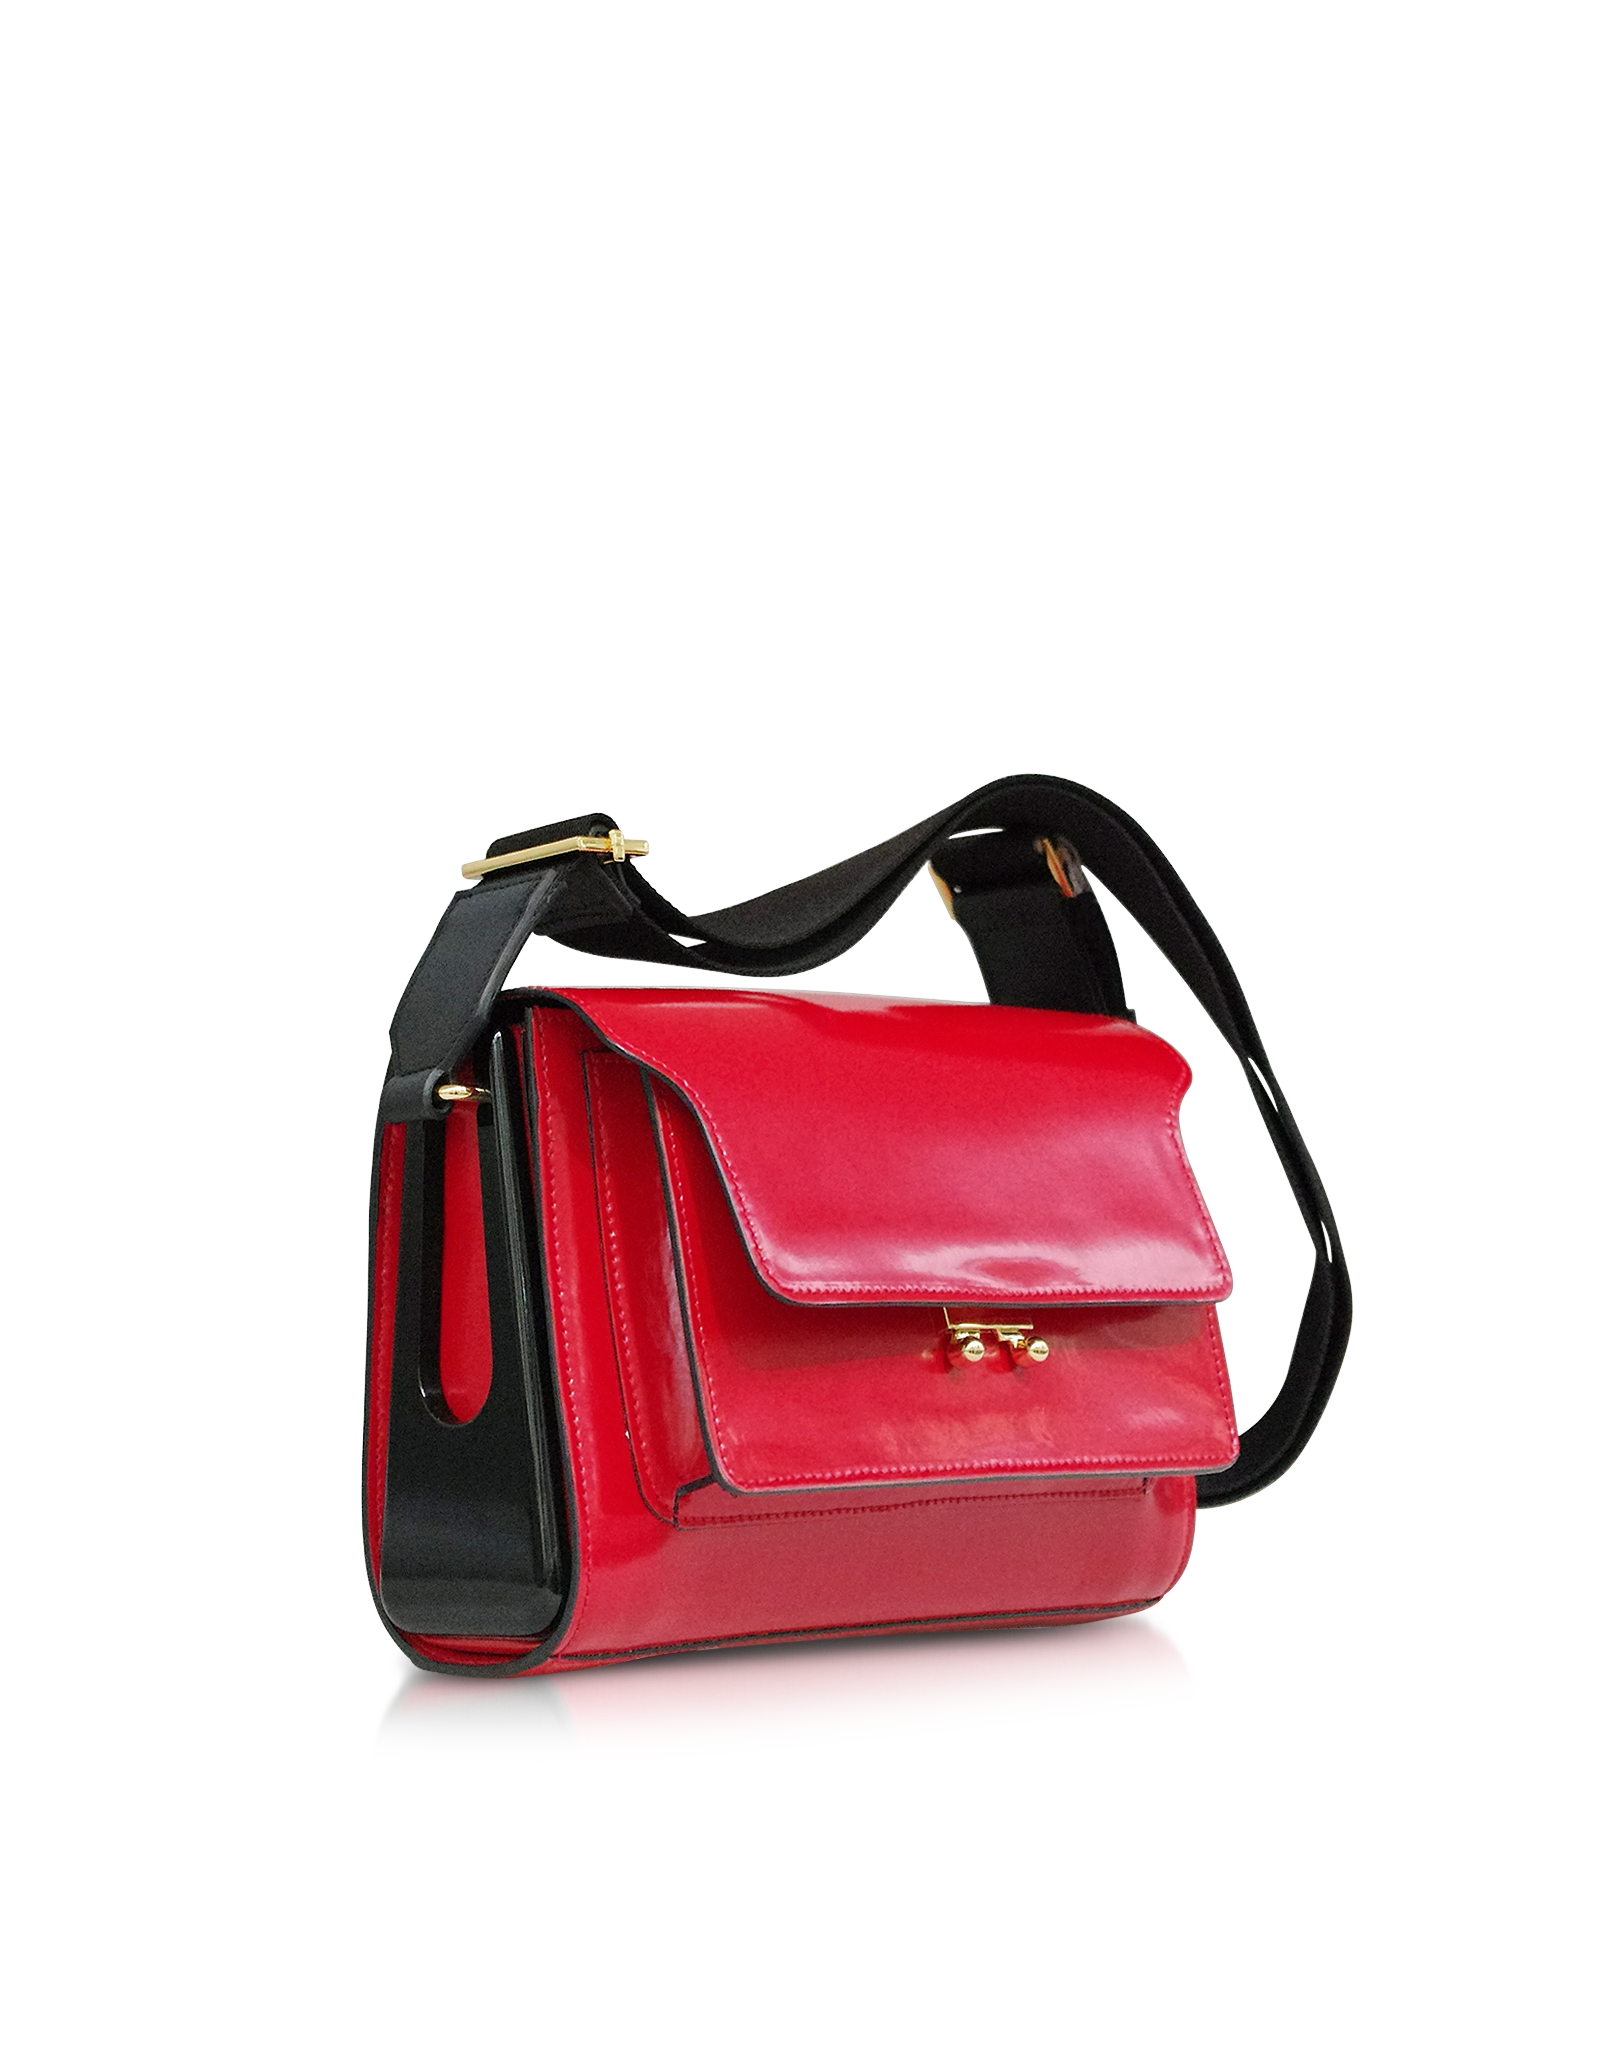 Lyst - Marni Metal Trunk Hot Red Patent Leather Shoulder Bag in Red